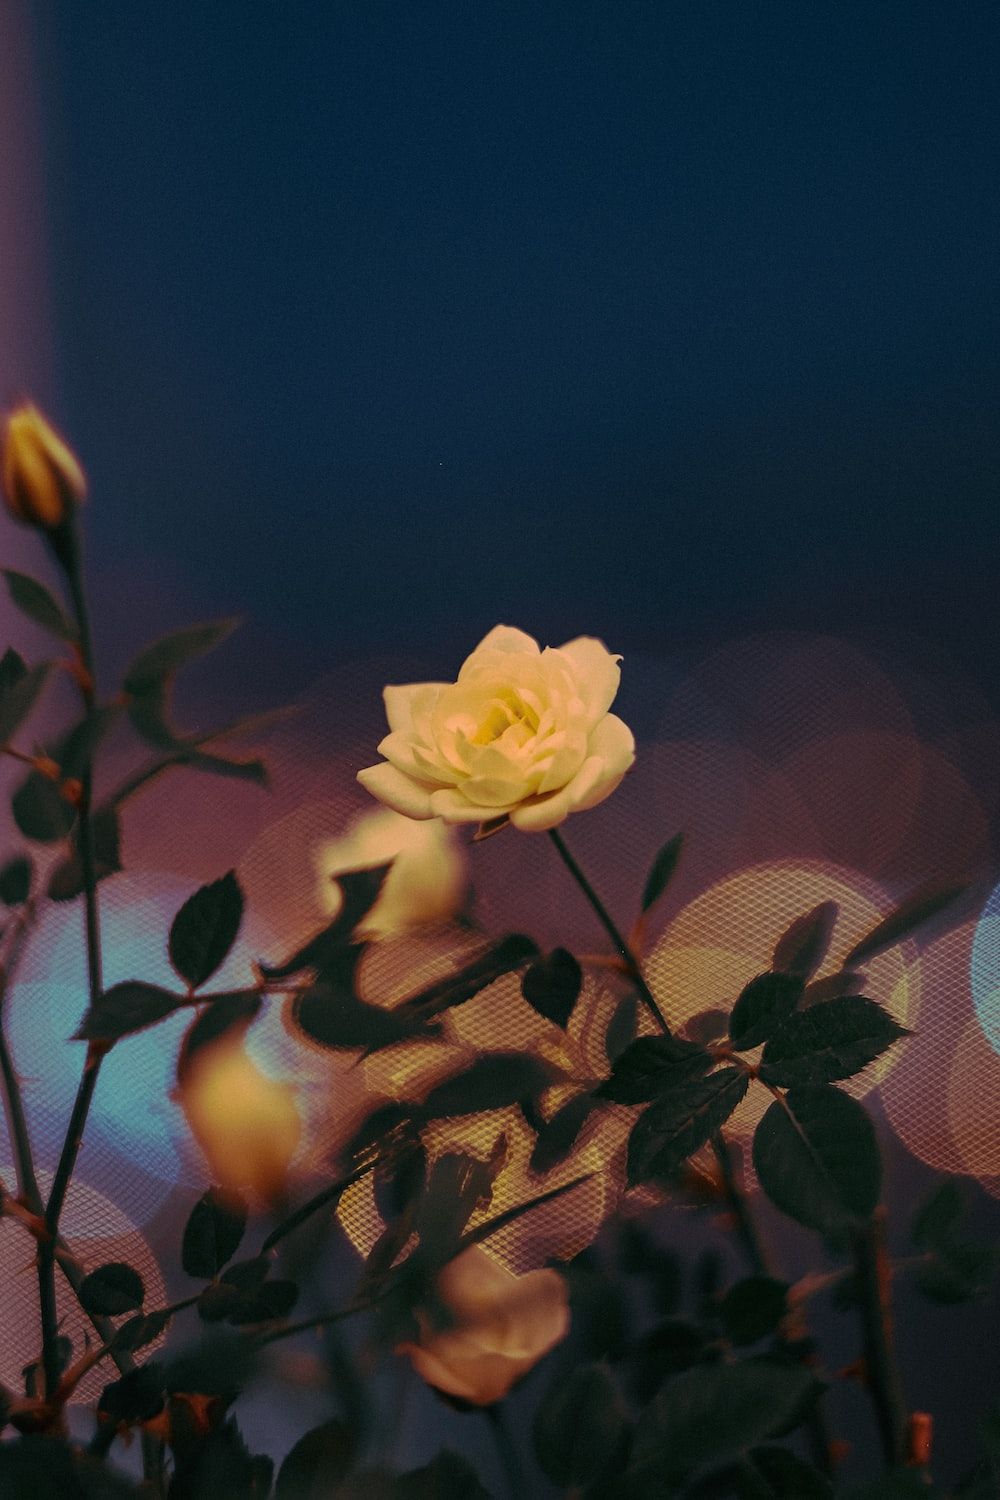 A yellow flower in front of some blurry lights - Roses